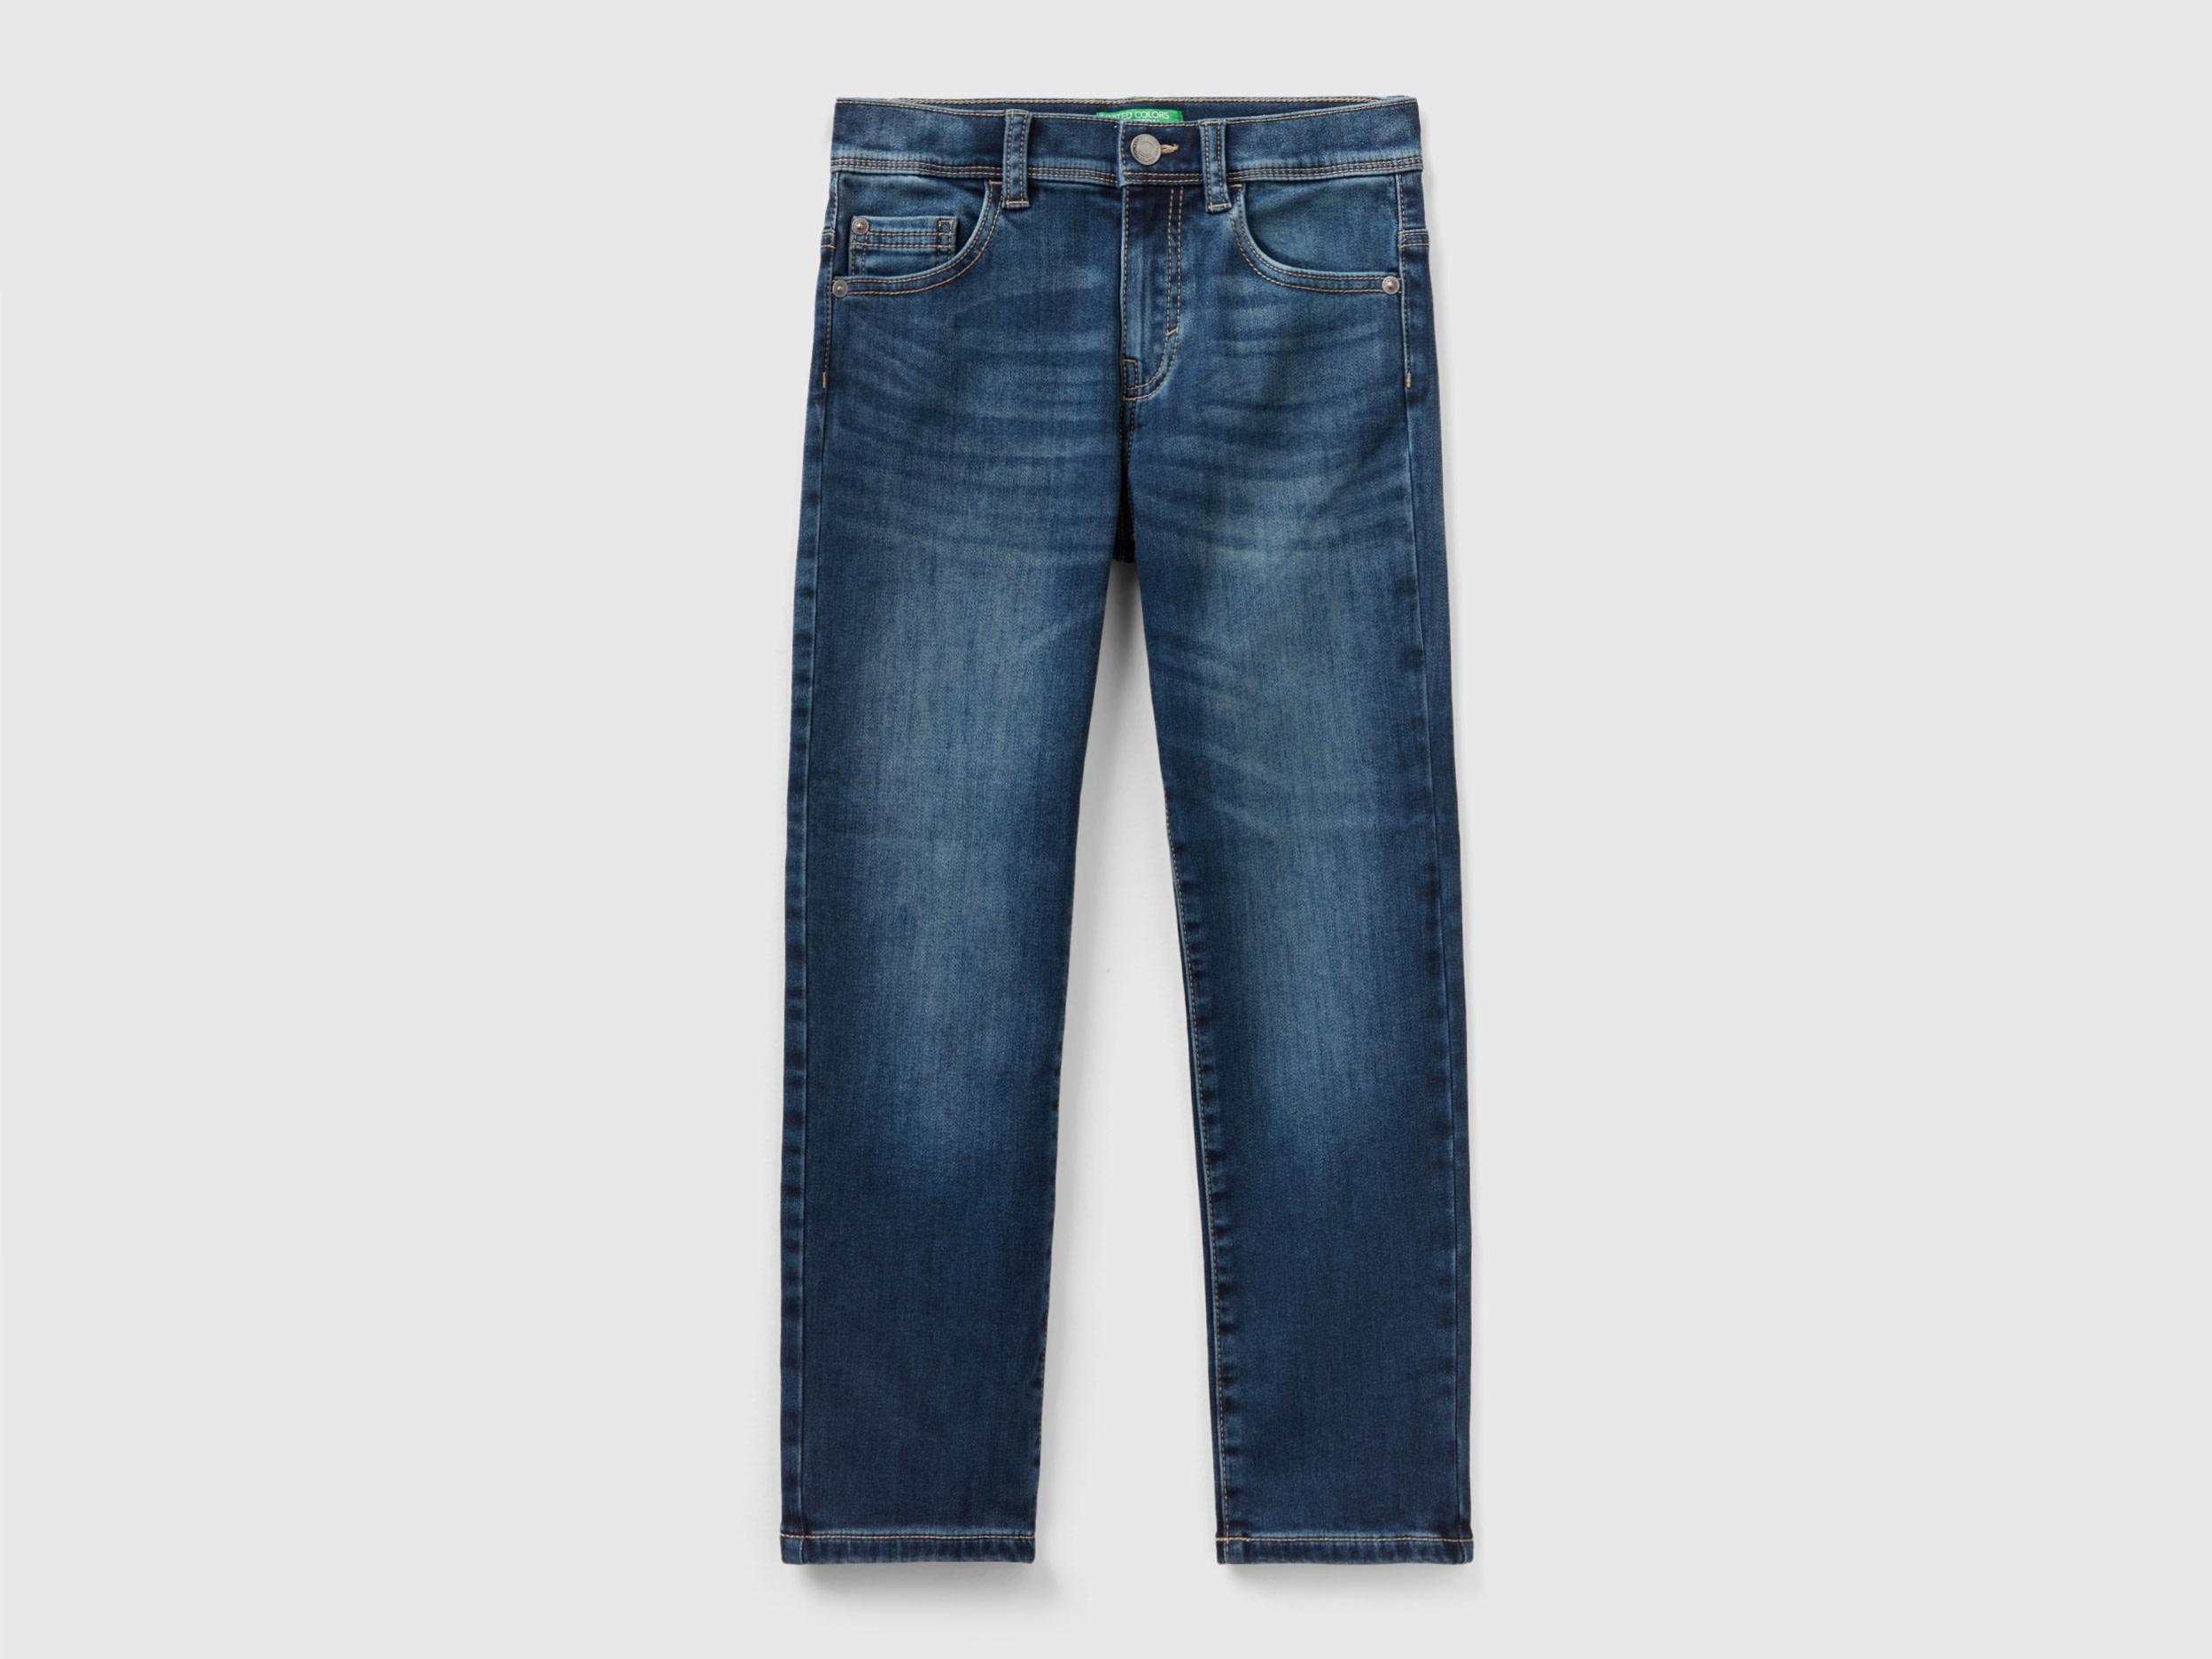 Benetton, Thermal Slim Fit Jeans, size S, Blue, Kids